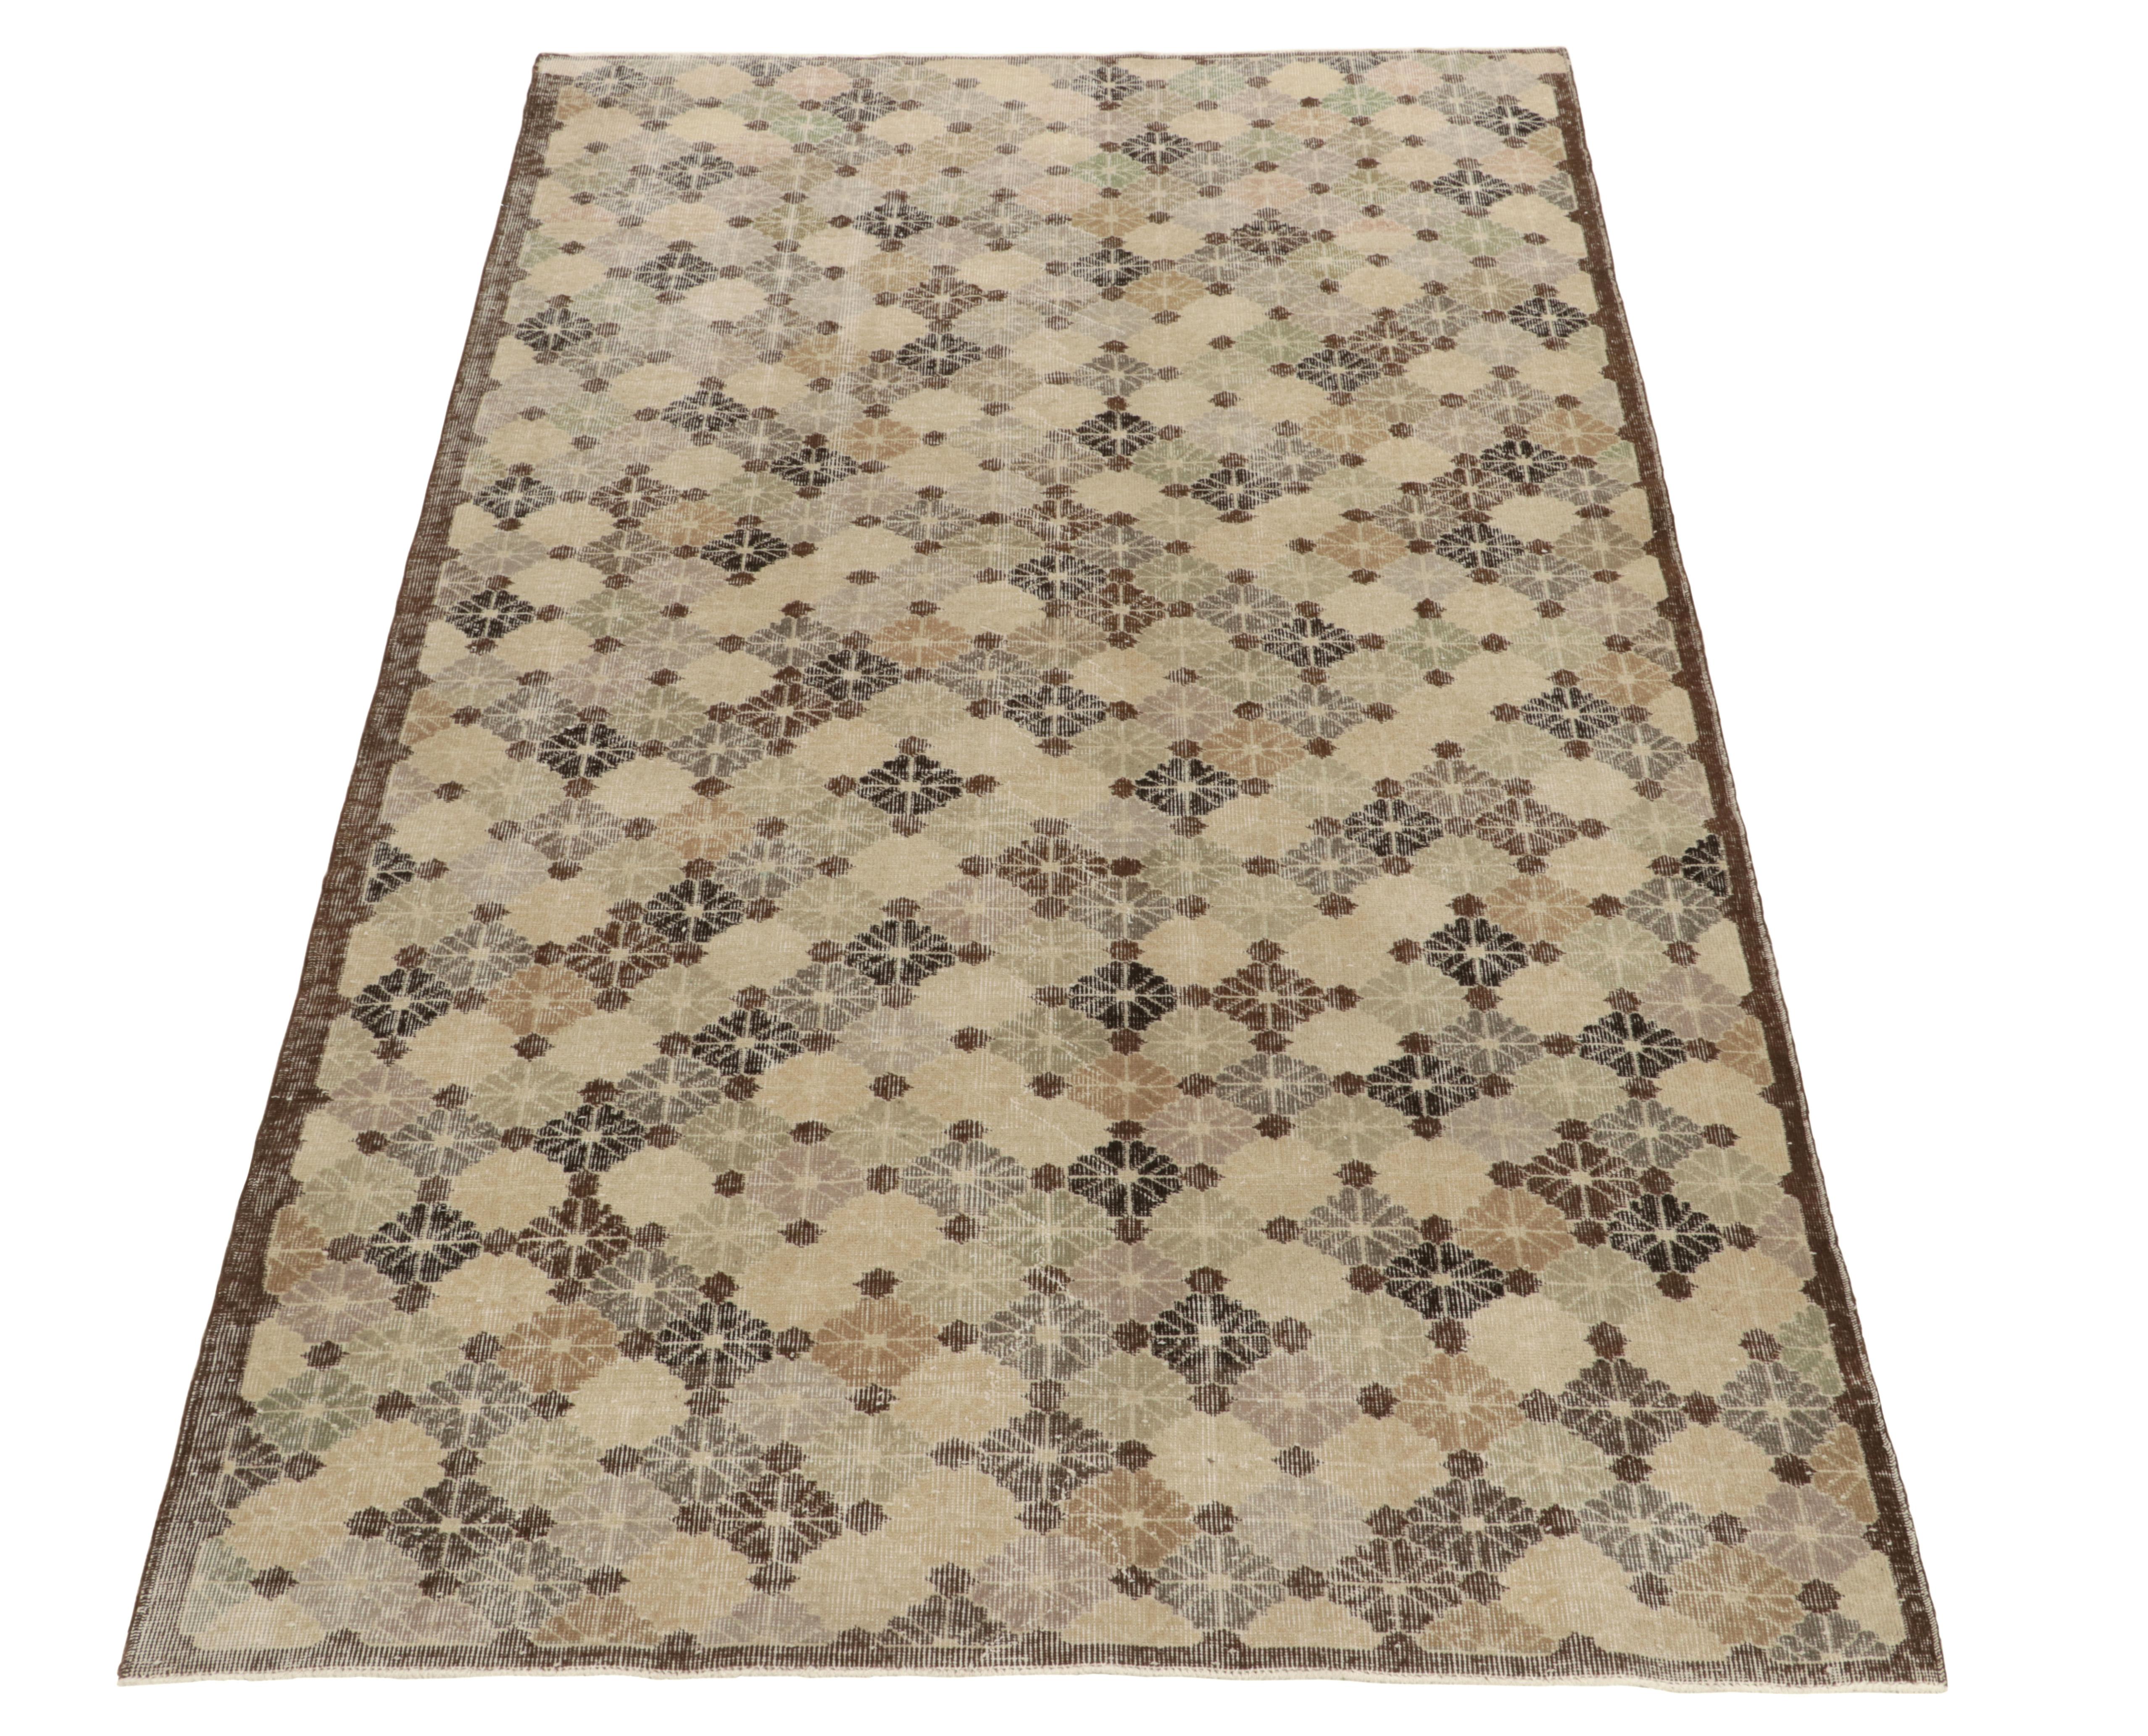 A 6x10 vintage rug exemplifying unique Turkish art deco sensibilities, among the latest in our Mid-Century Pasha Collection. Commemorating a bold Turkish designer, this 1960s piece features refined floral patterns in pale tones of green, blue, and